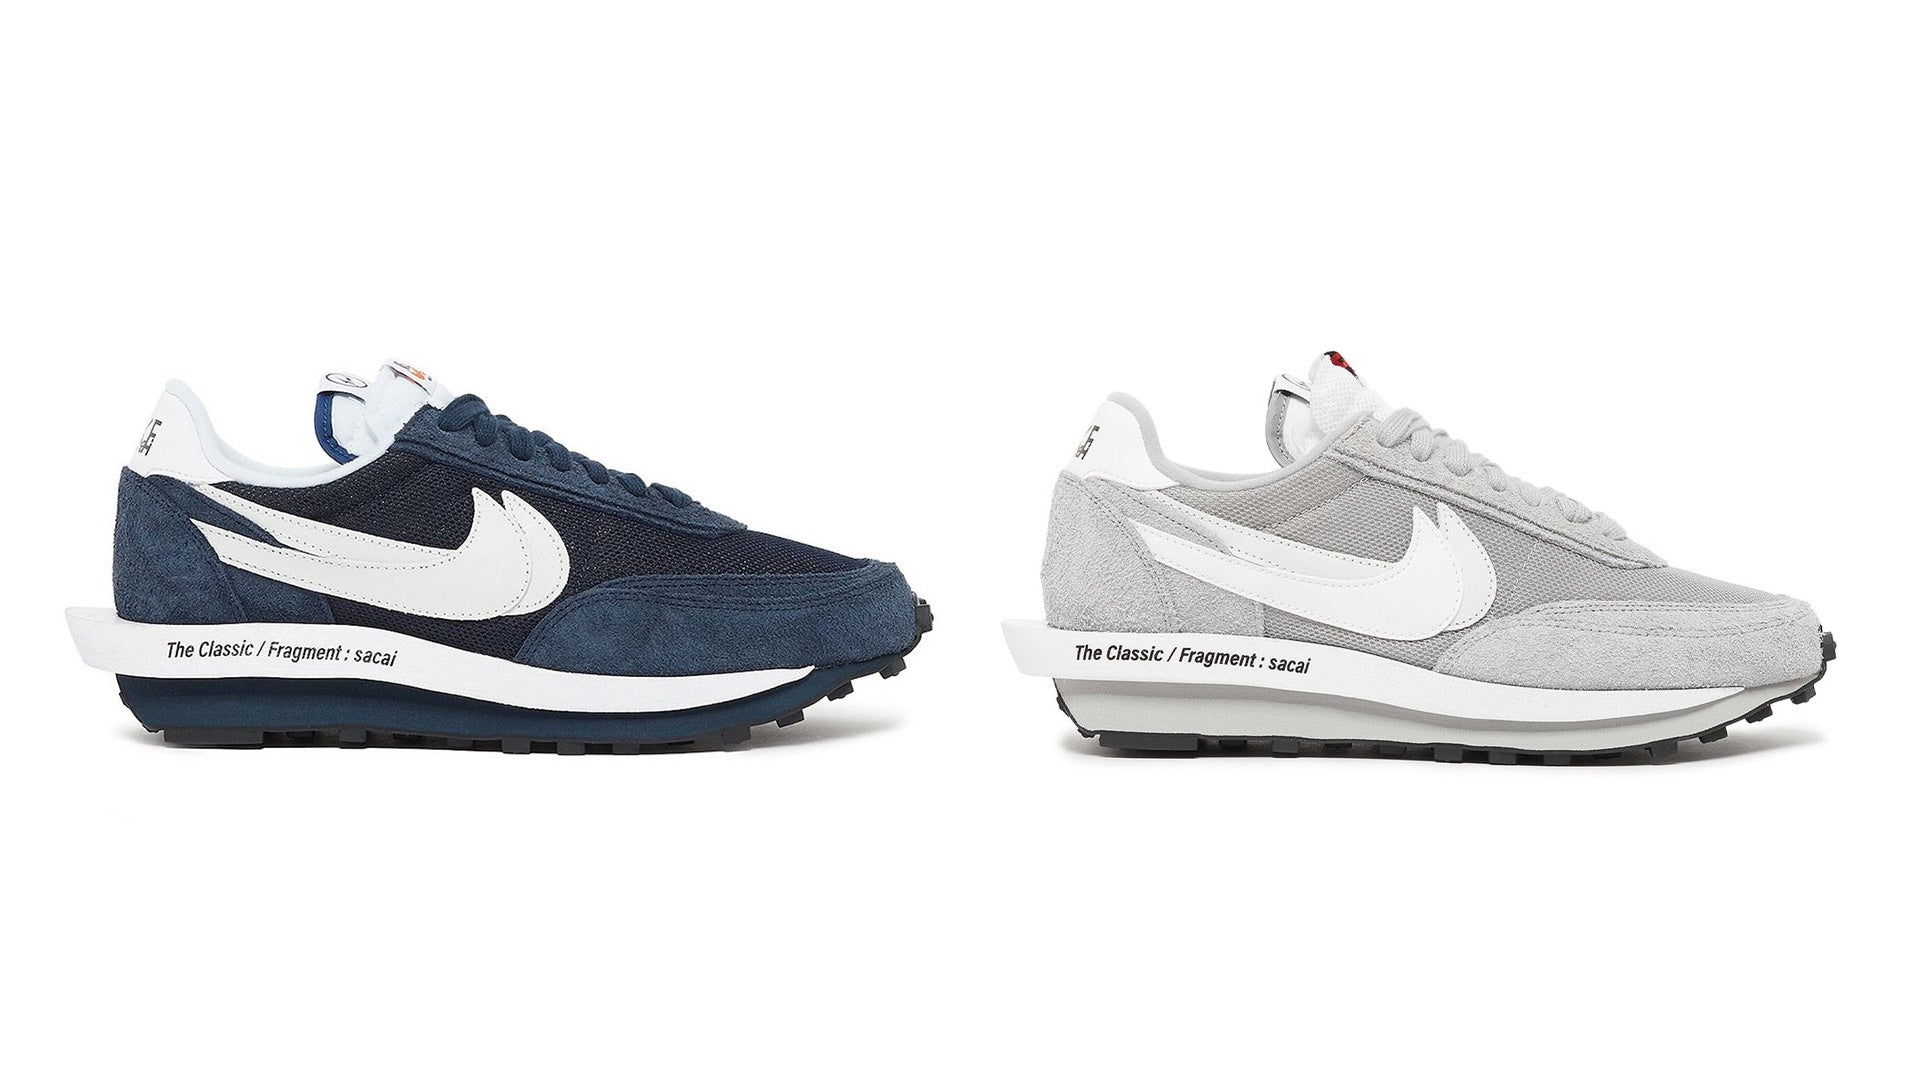 Fragment x Sacai x Nike LDWaffle 'Blue Void' and 'Wolf Grey' Dropping This Month?